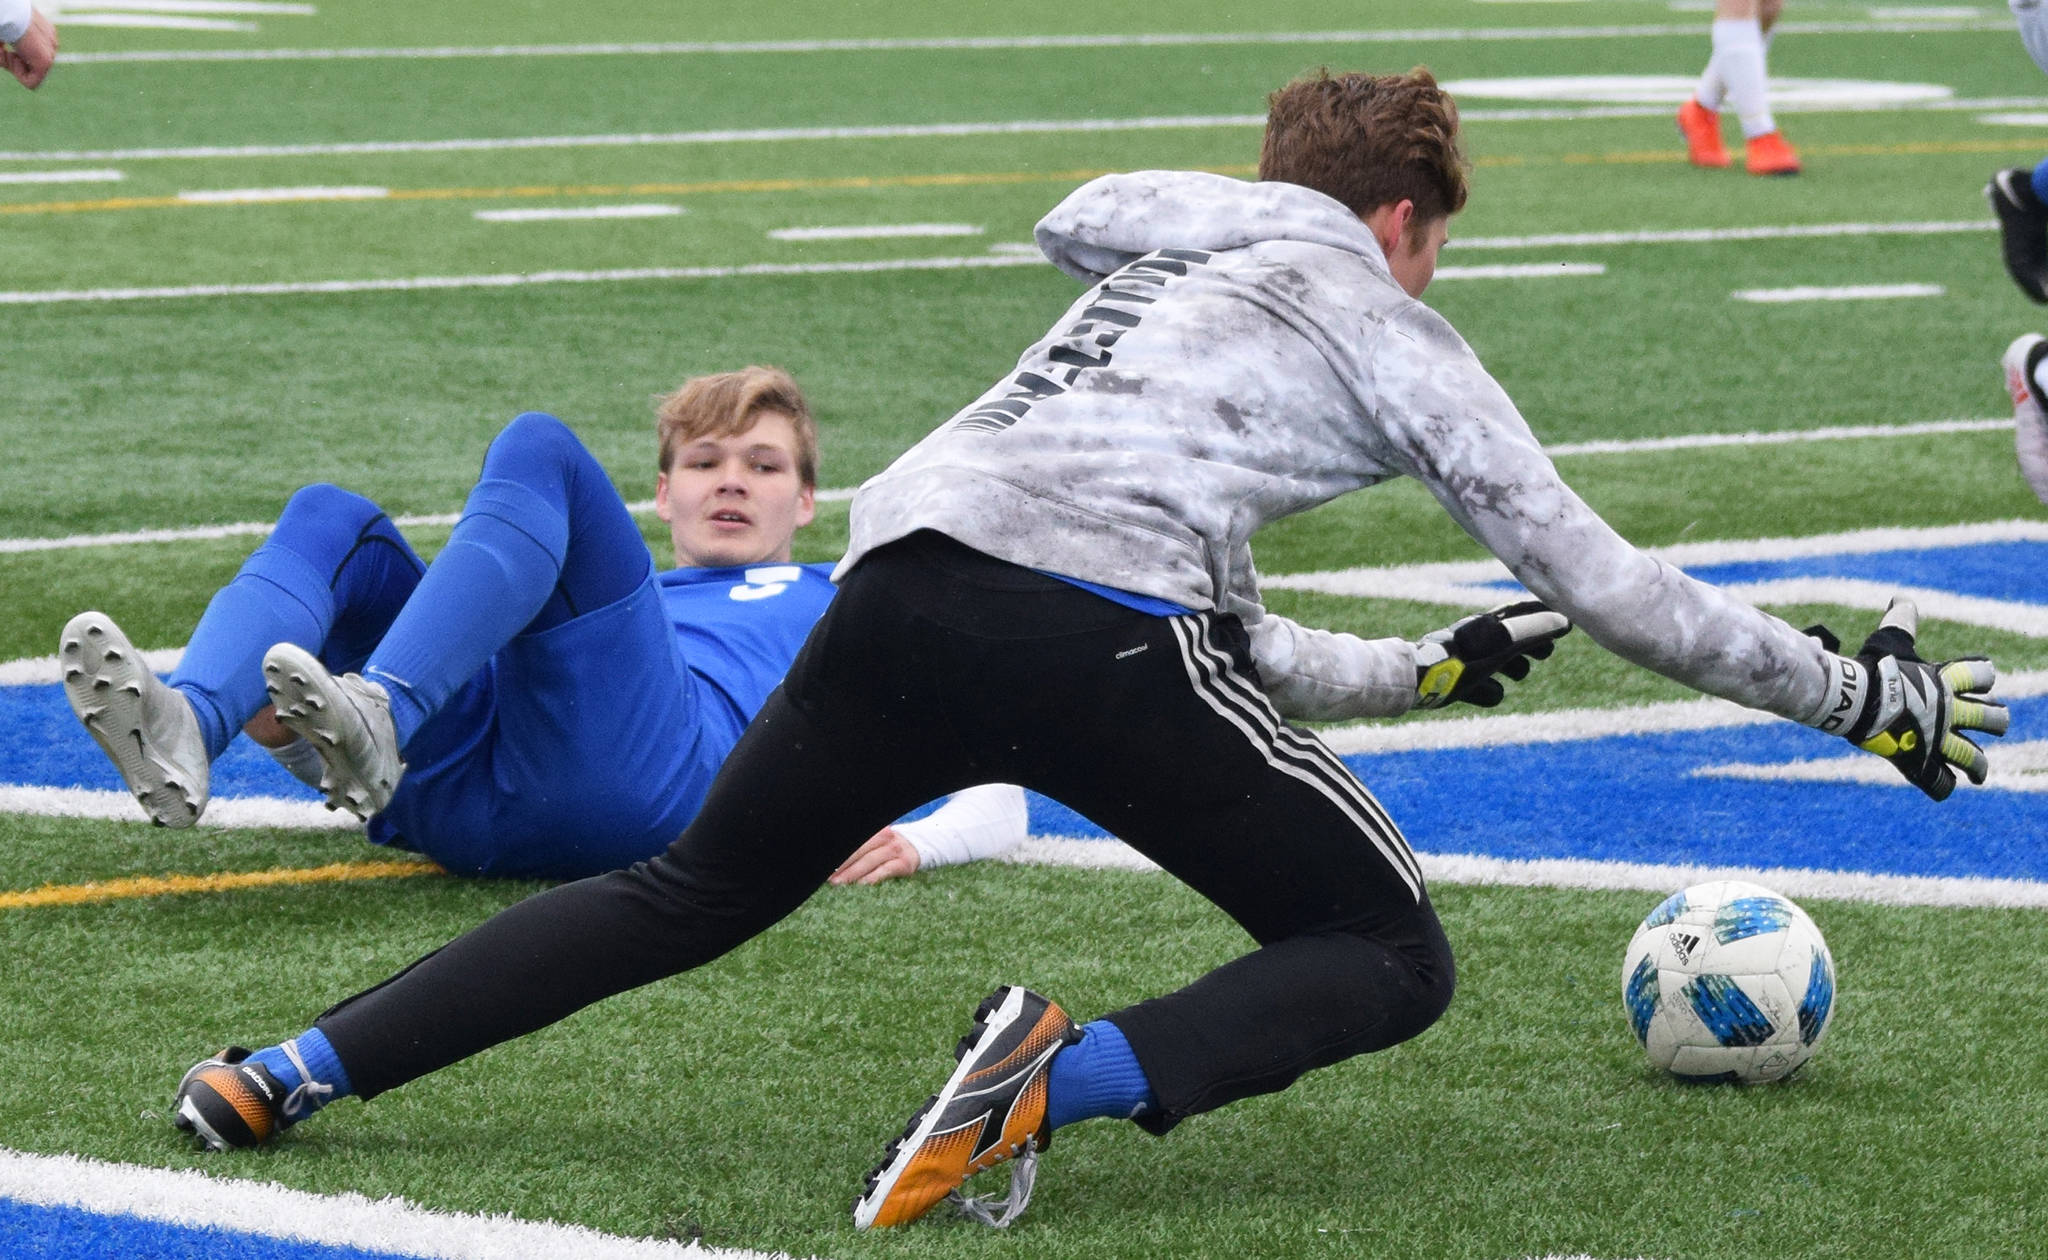 Soldotna’s Rory Nelson watches as SoHi goalkeeper Colton Sorhus (forwar) falls on the ball Saturday, May 11, 2019, against Homer in a Peninsula Conference game in Soldotna, Alaska. (Photo by Joey Klecka/Peninsula Clarion)